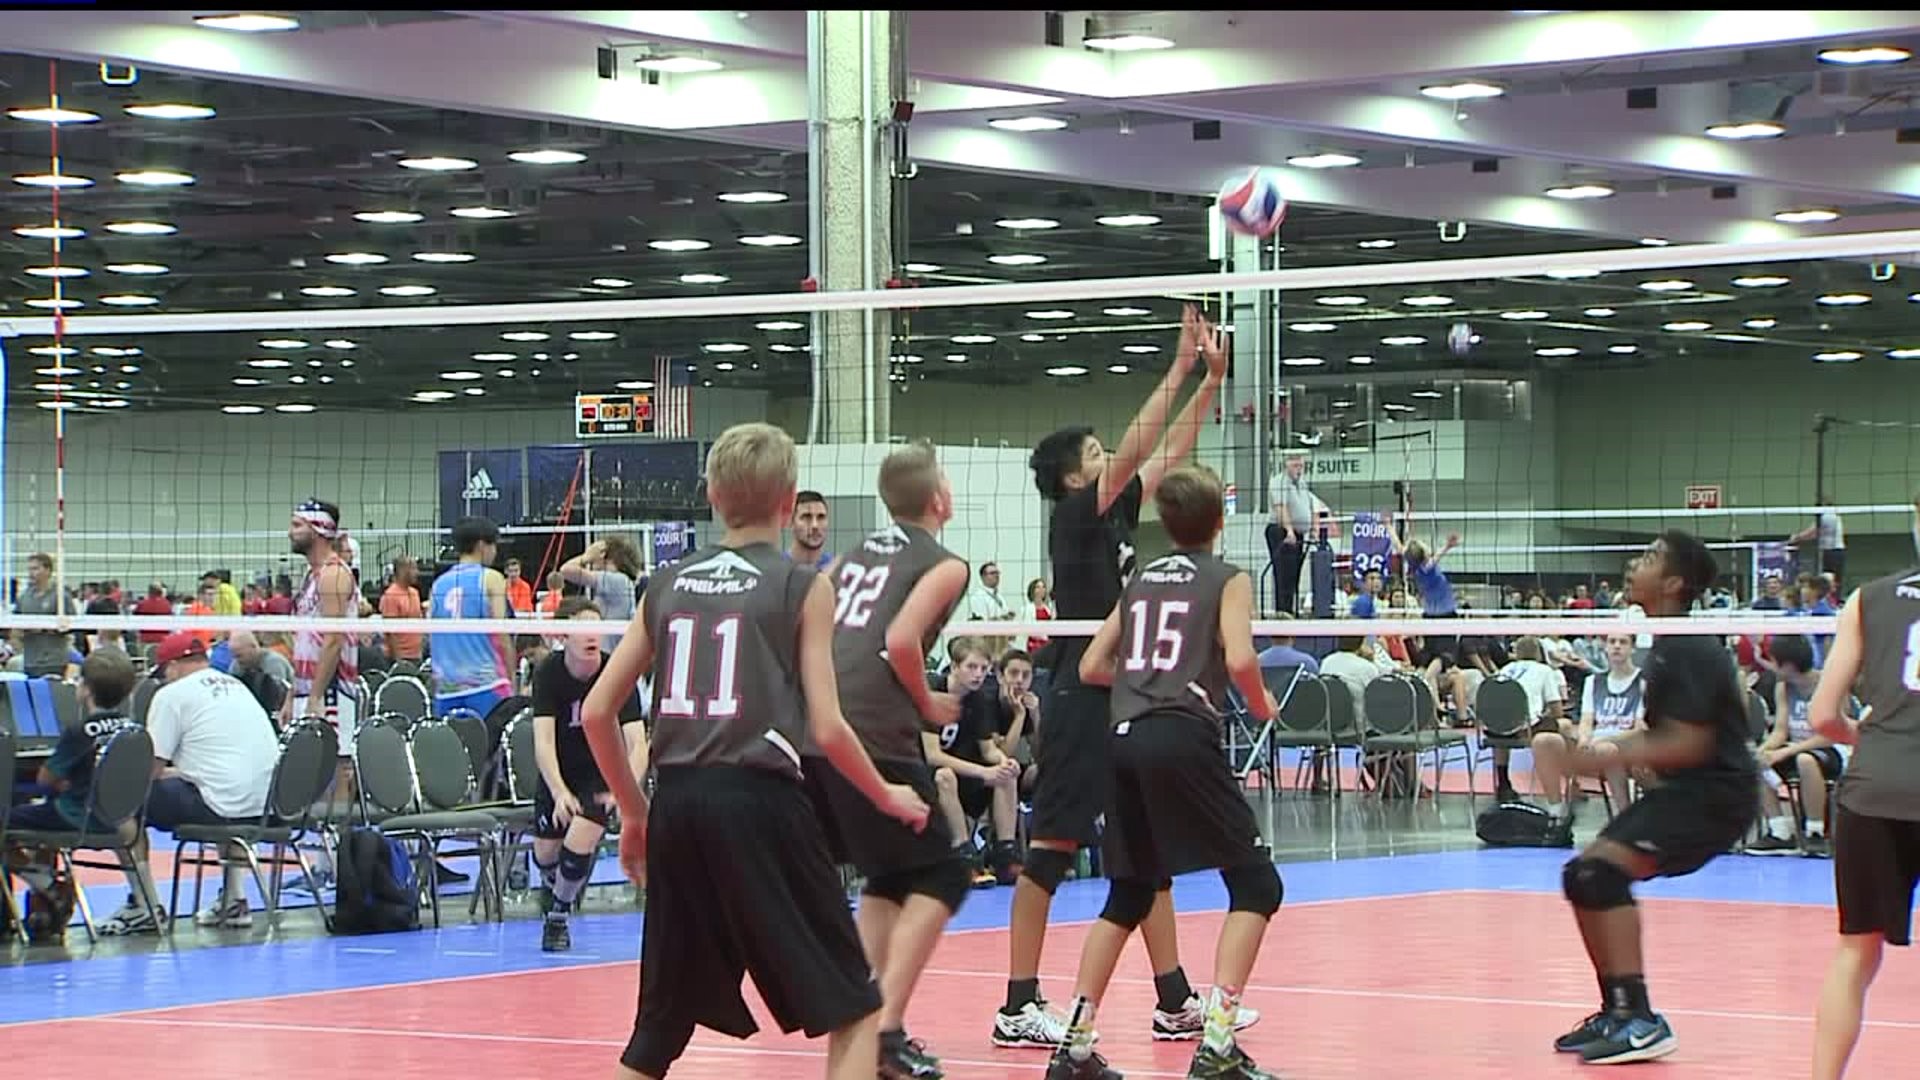 Prevail Volleyball on the Court at USA Boys Junior Volleyball